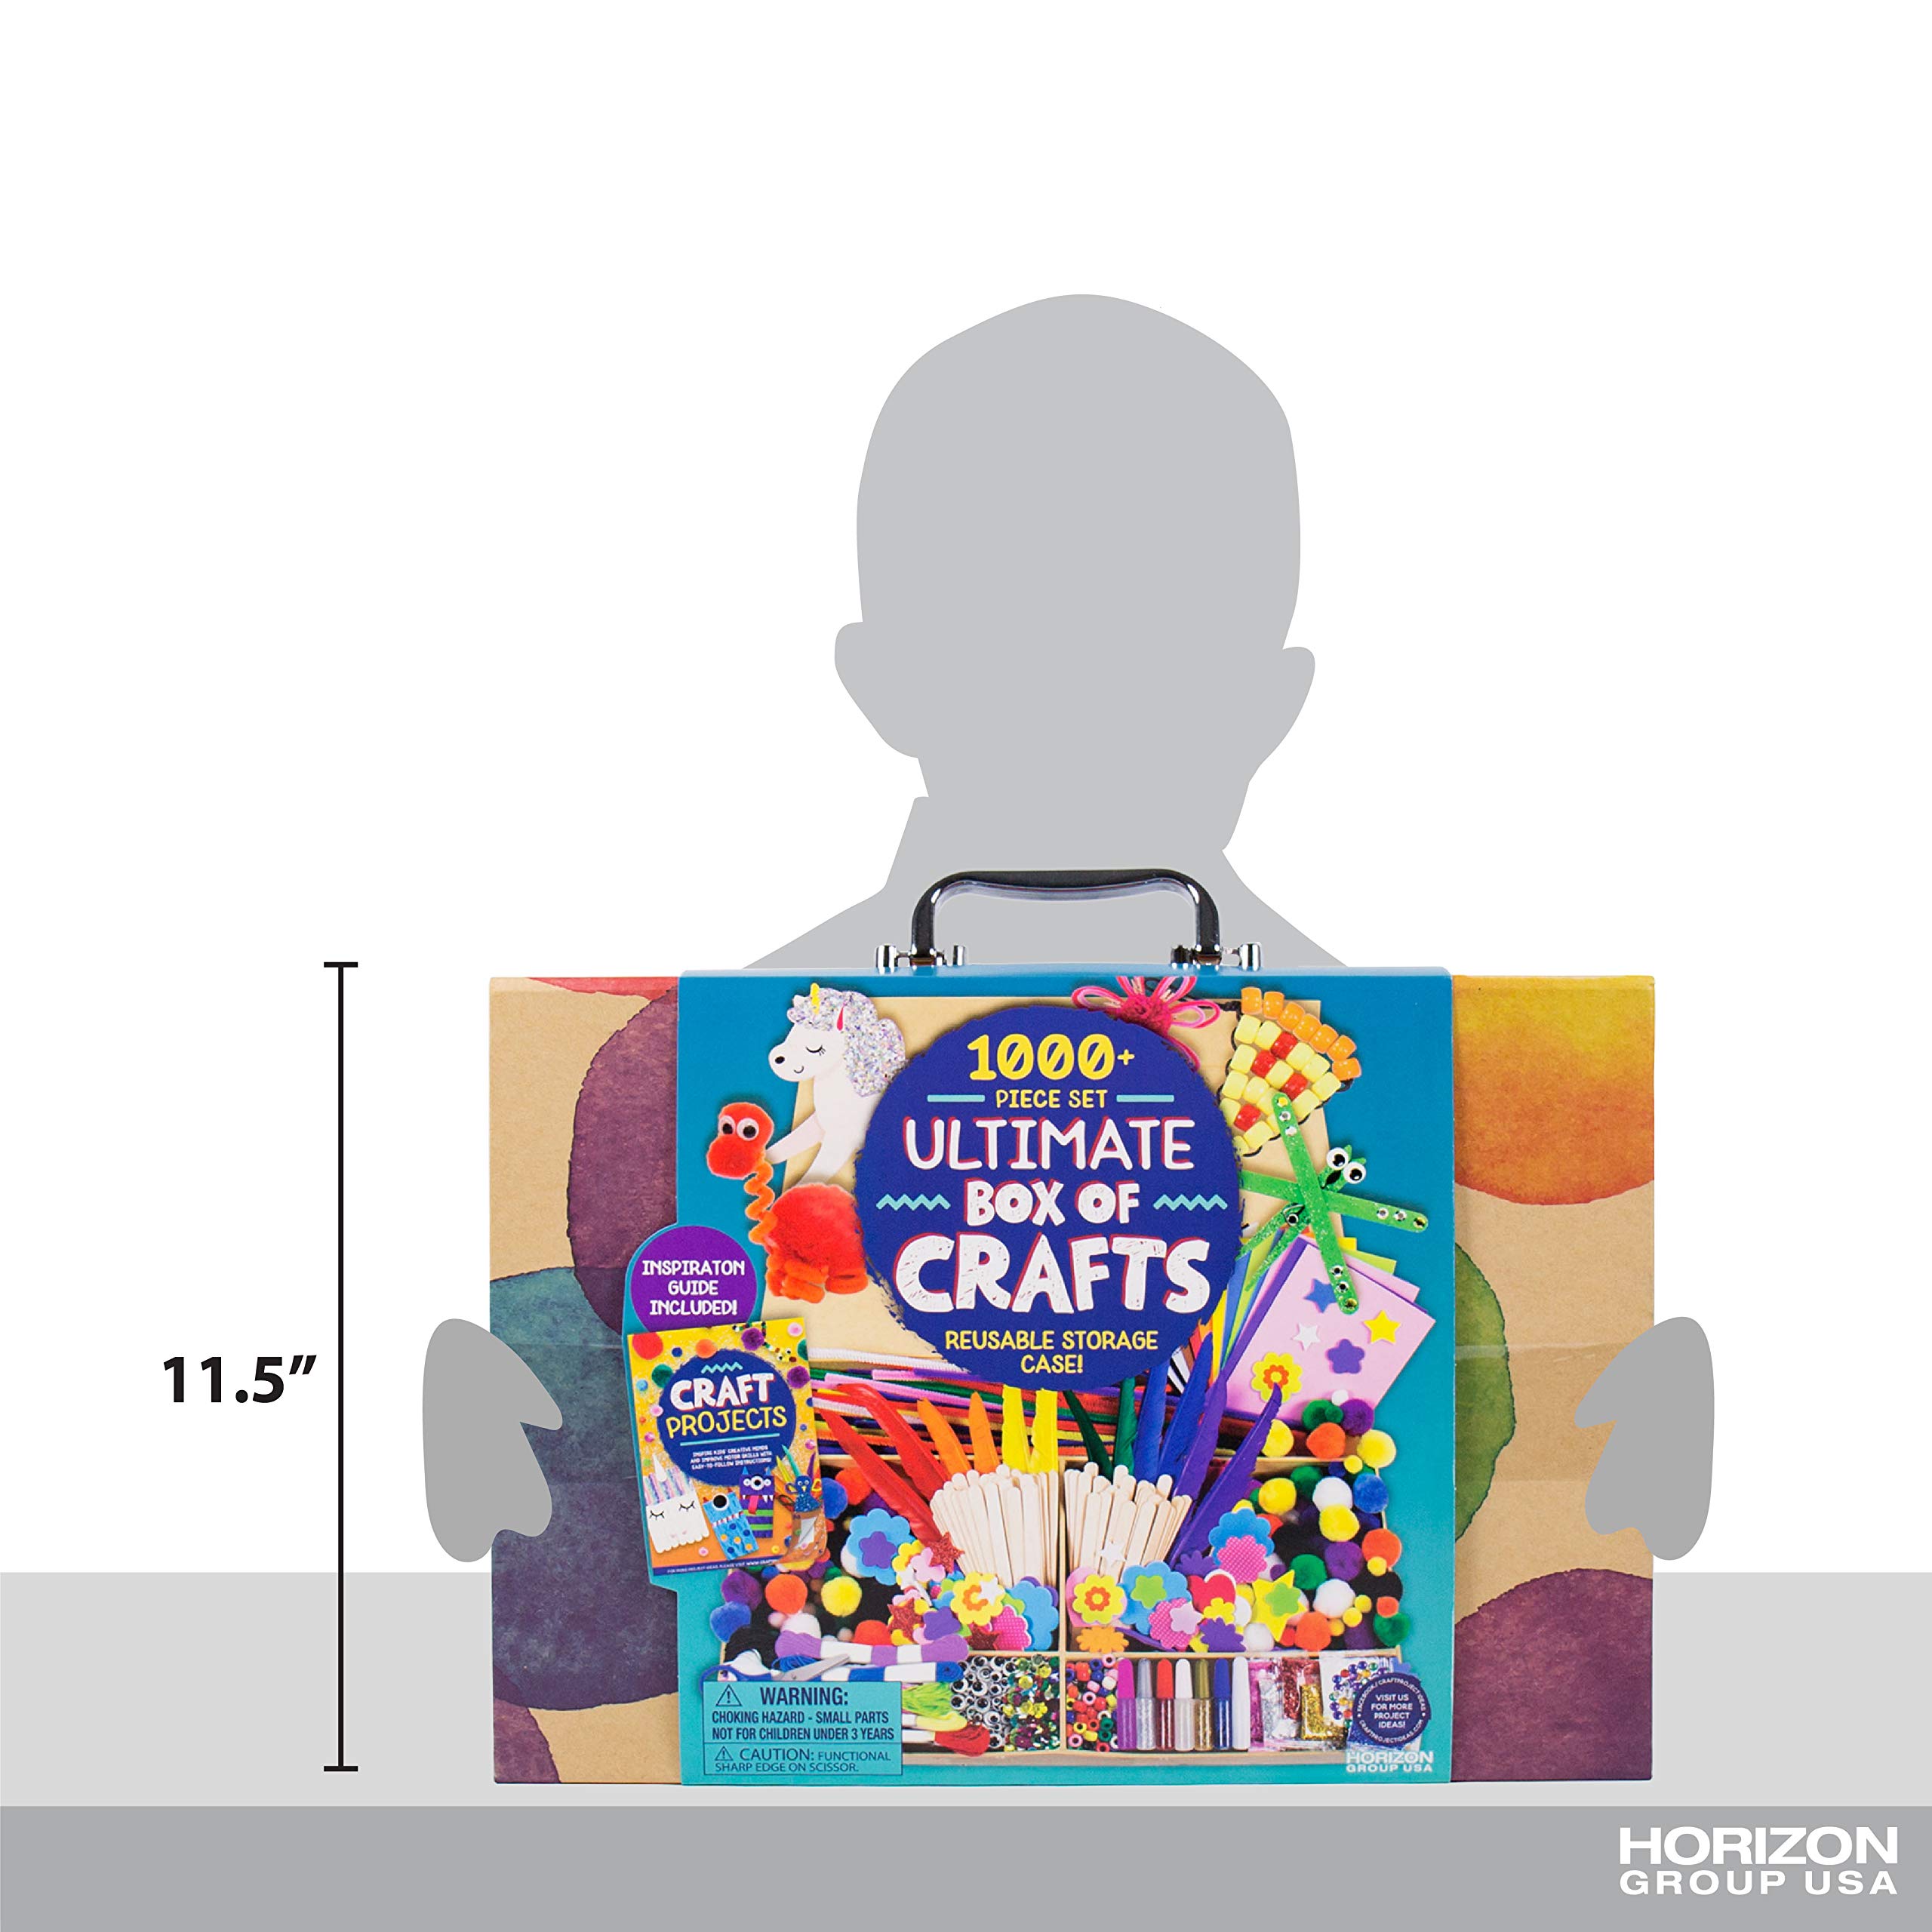 Made By Me Ultimate Craft Box, Art & Craft Activities 1000 Piece Set, Storage Case, Great for Preschool, Adult & Group Projects, Craft Box for Kids Girls & Boys